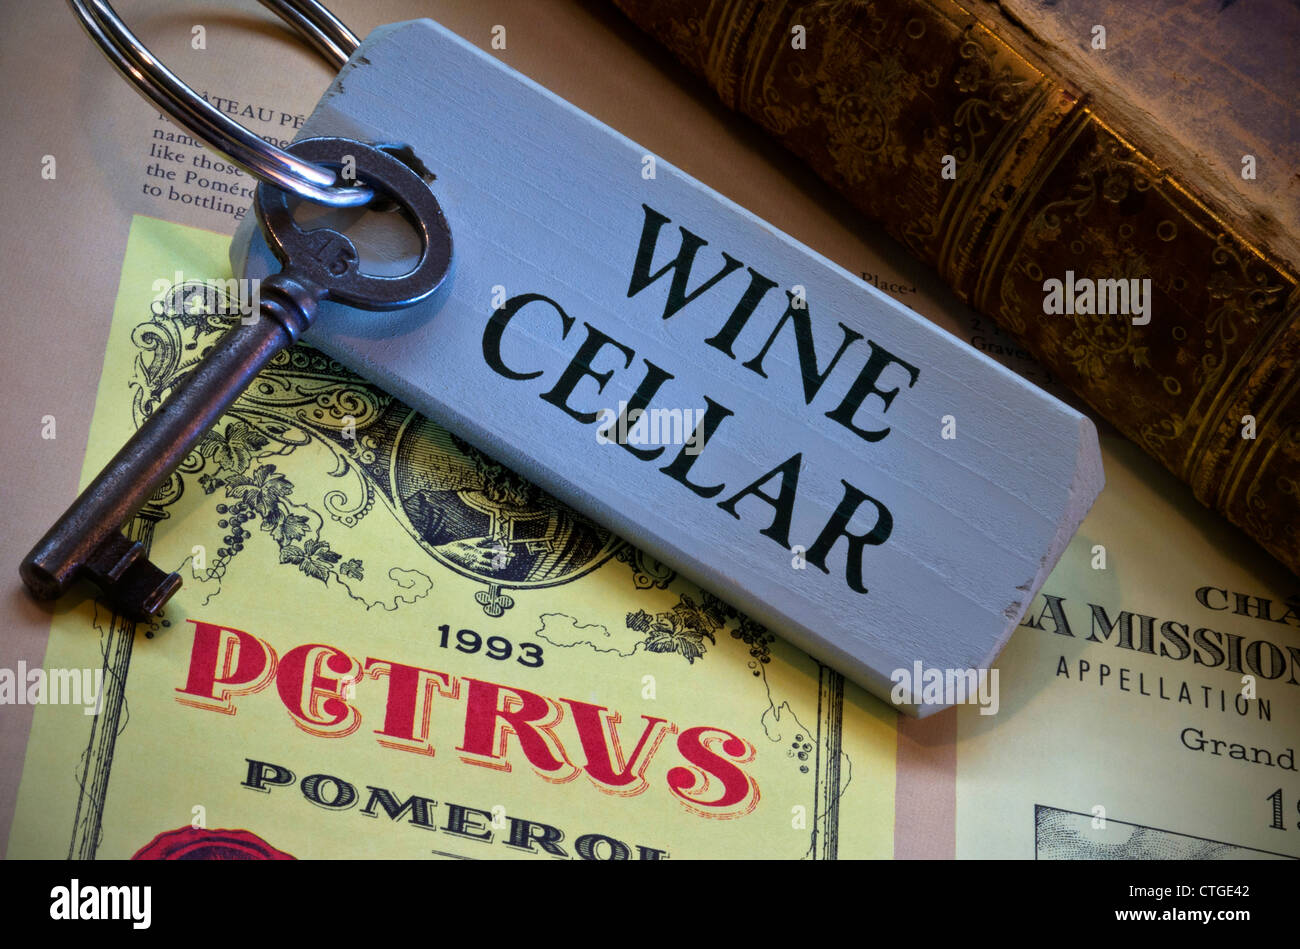 Wine cellar key by old leather bound book and an illustration of a  Petrus fine Pomerol wine bottle label in reference book Stock Photo